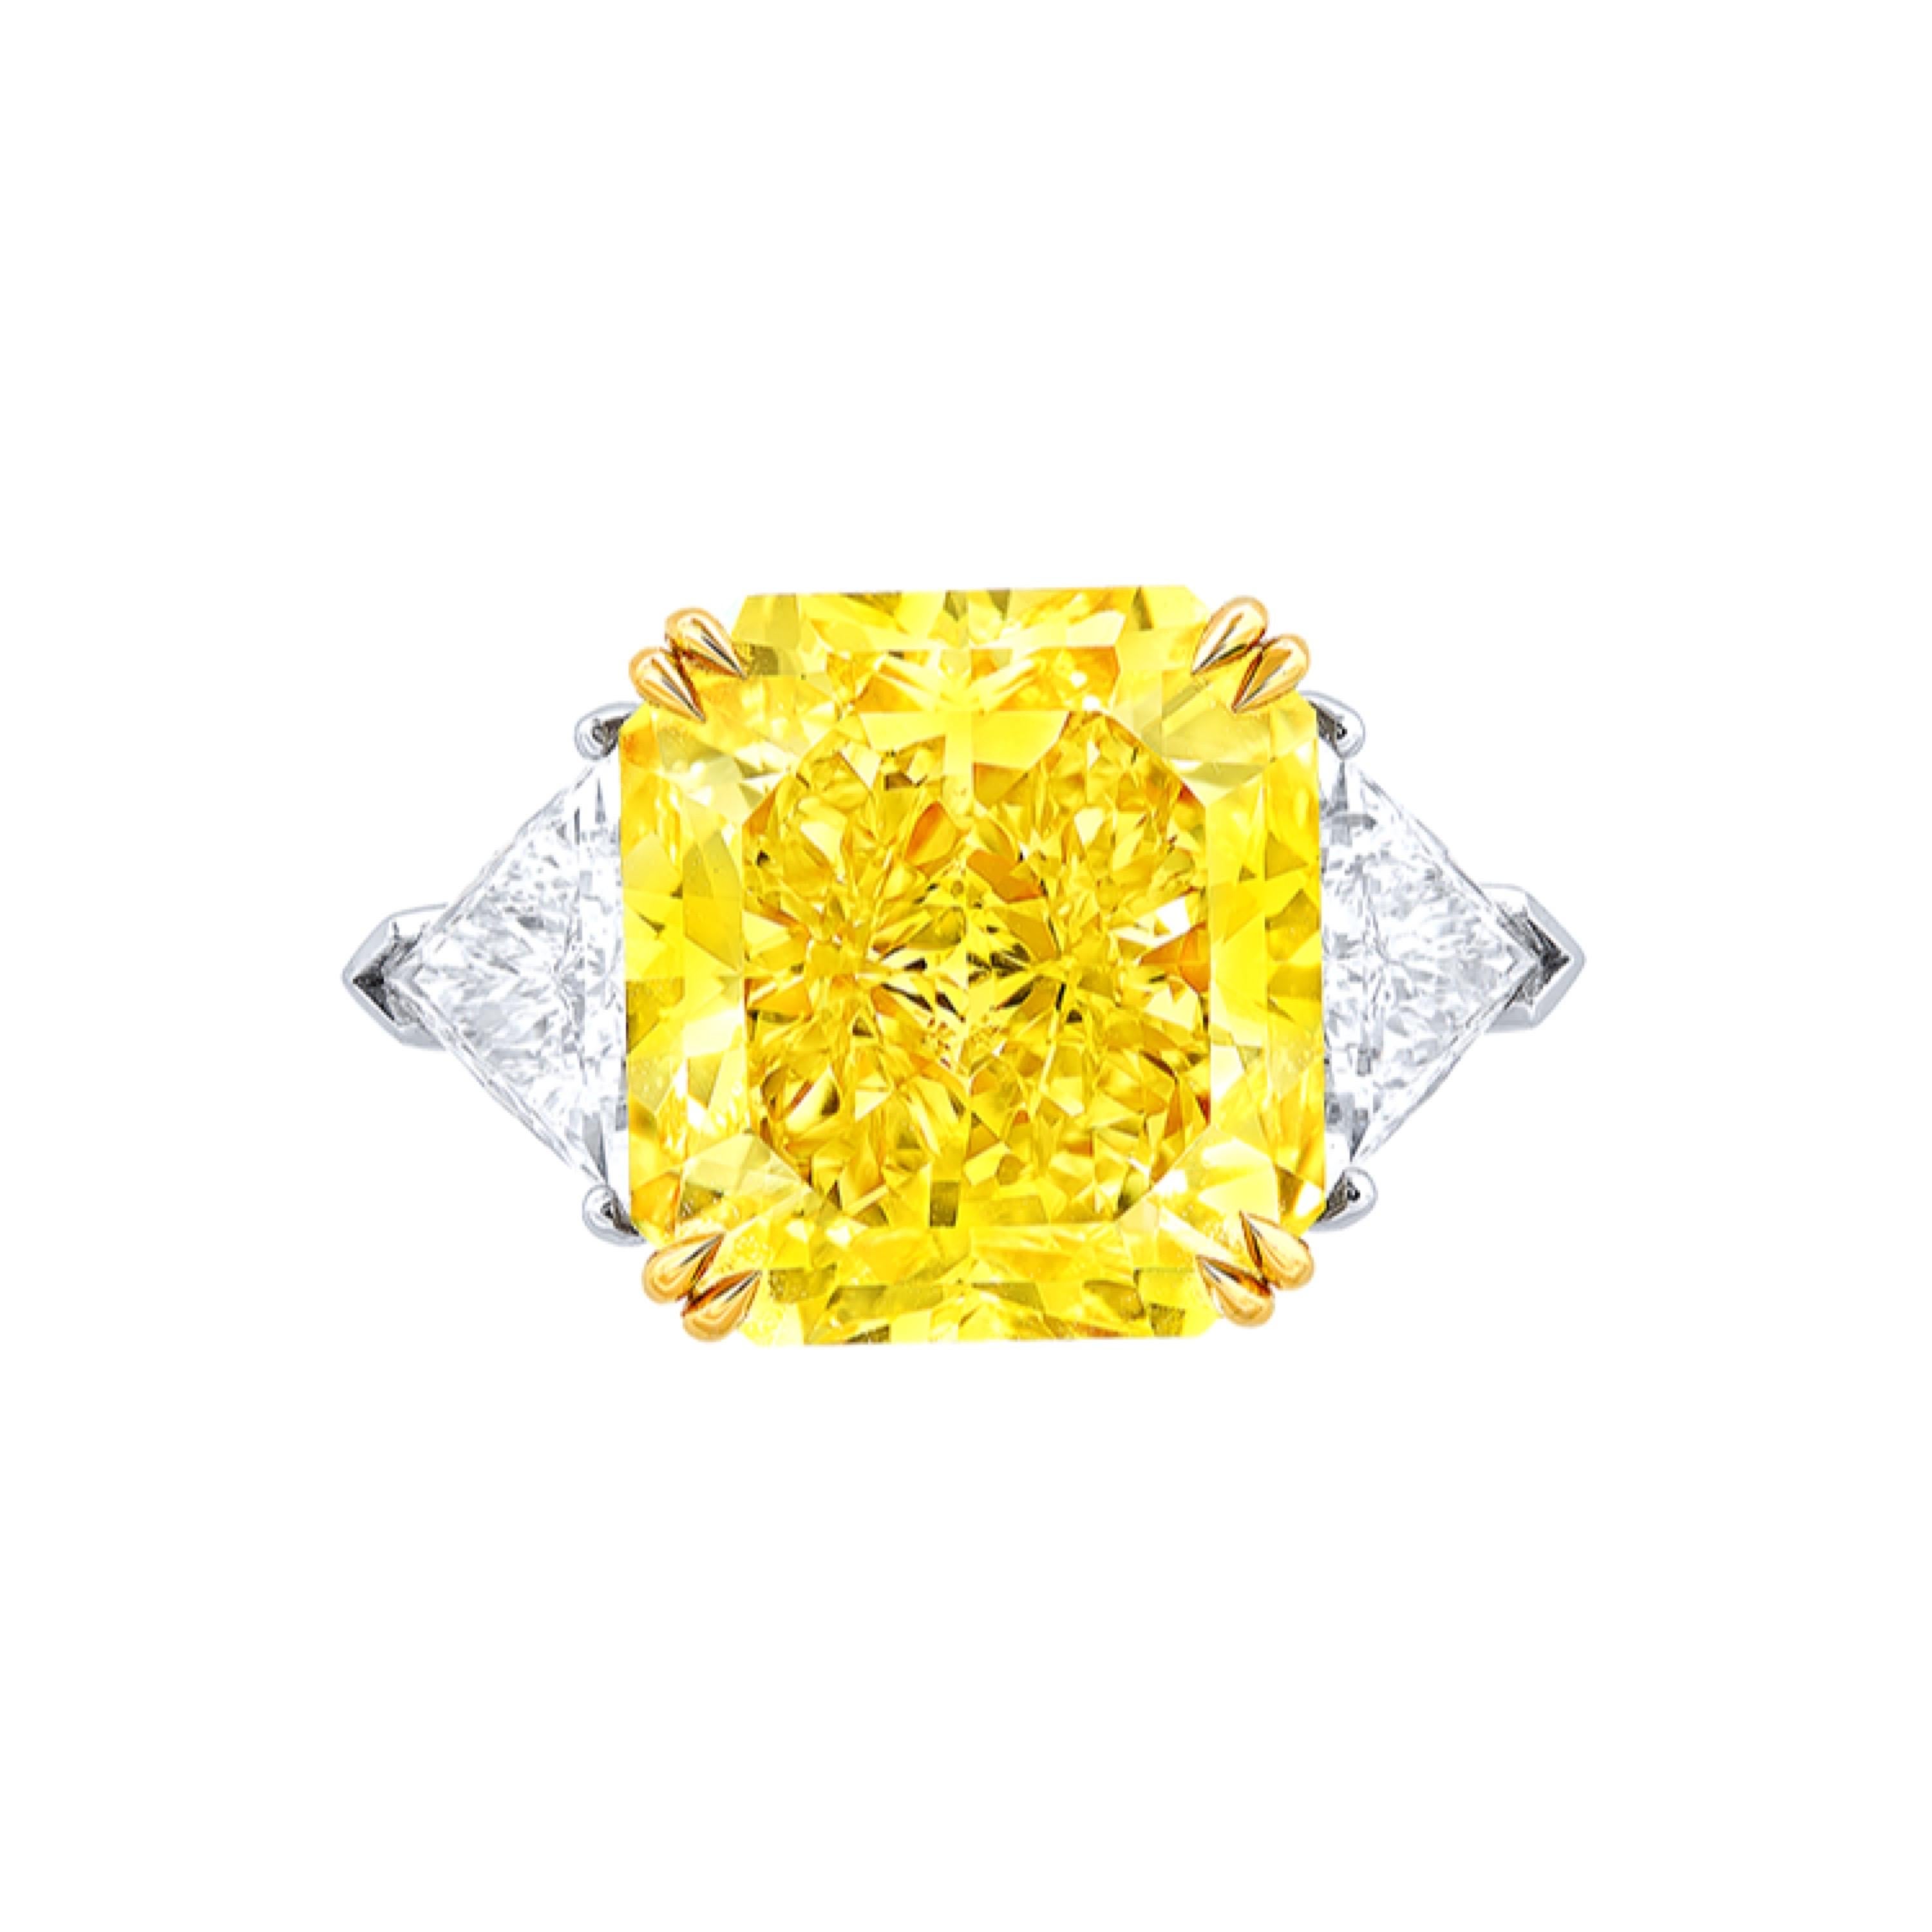 From the museum vault at Emilio Jewelry located on New York's iconic 5th Avenue,

Center Stone: 14.00ct+ Fancy Intense Yellow VS1 CUT-CORNERED RECTANGULAR
Matching setting: side white diamond about 1.14 carats, 
